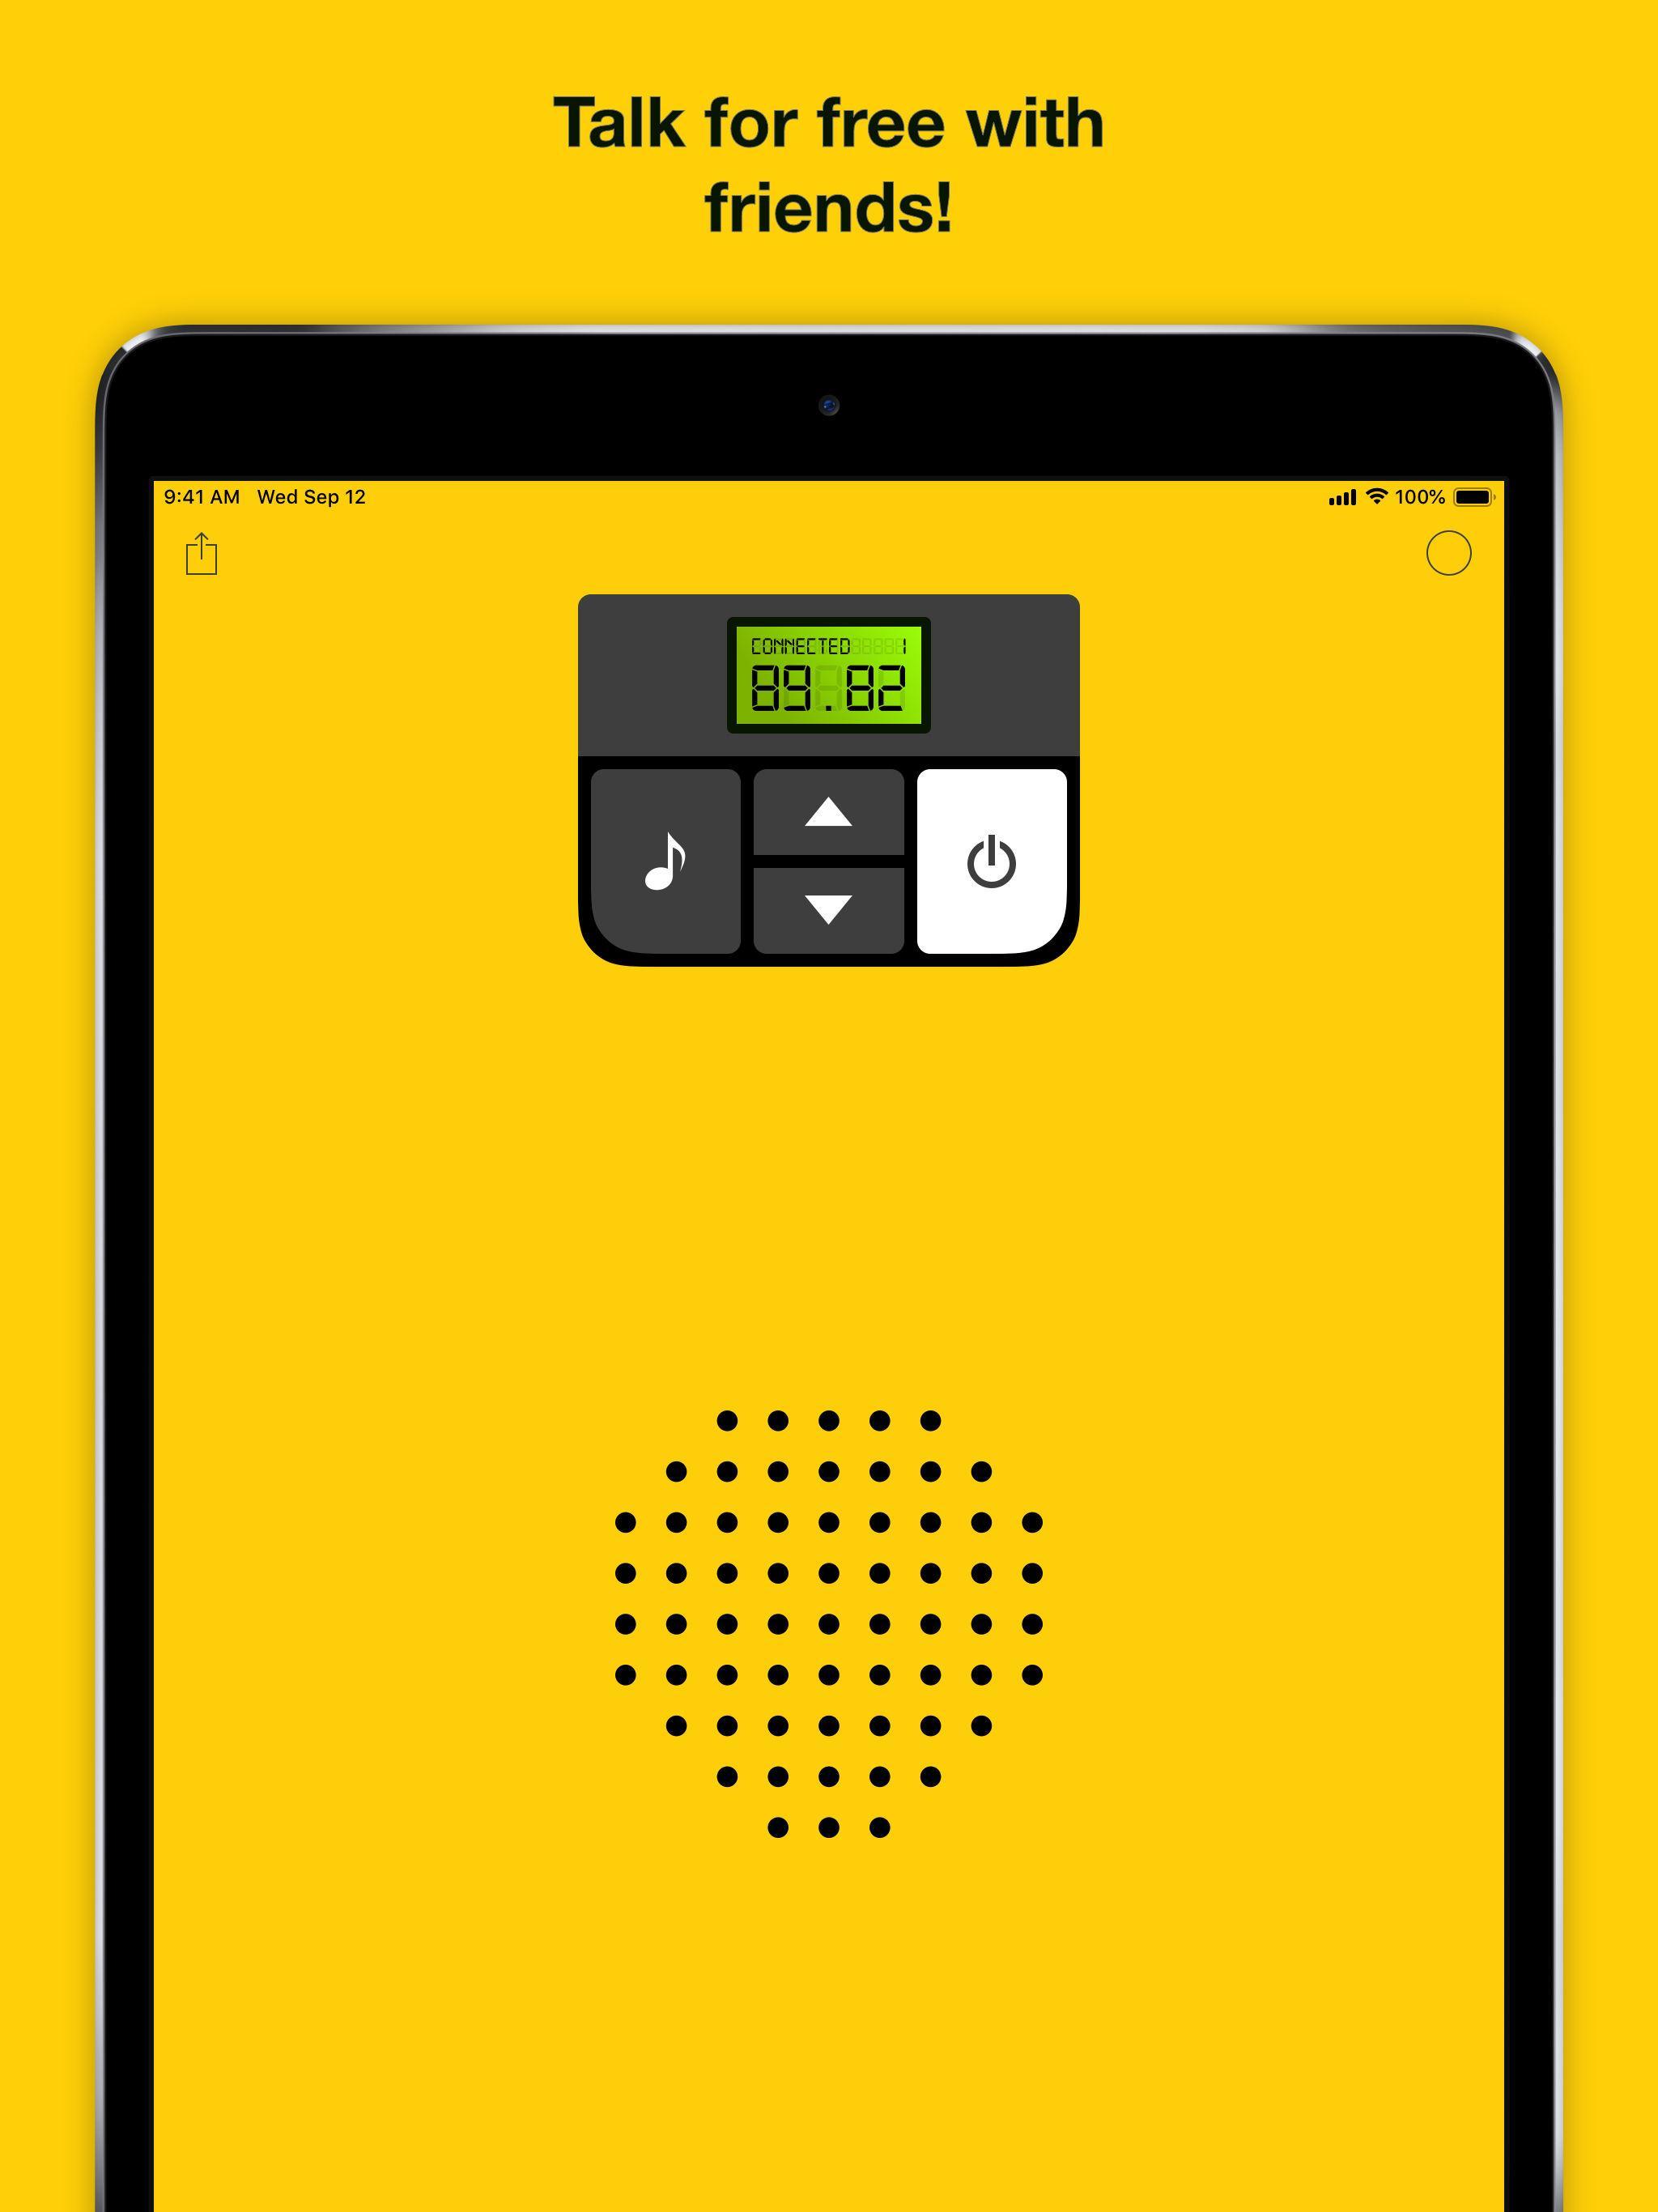 Walkie talkie - Communication for Android - APK Download